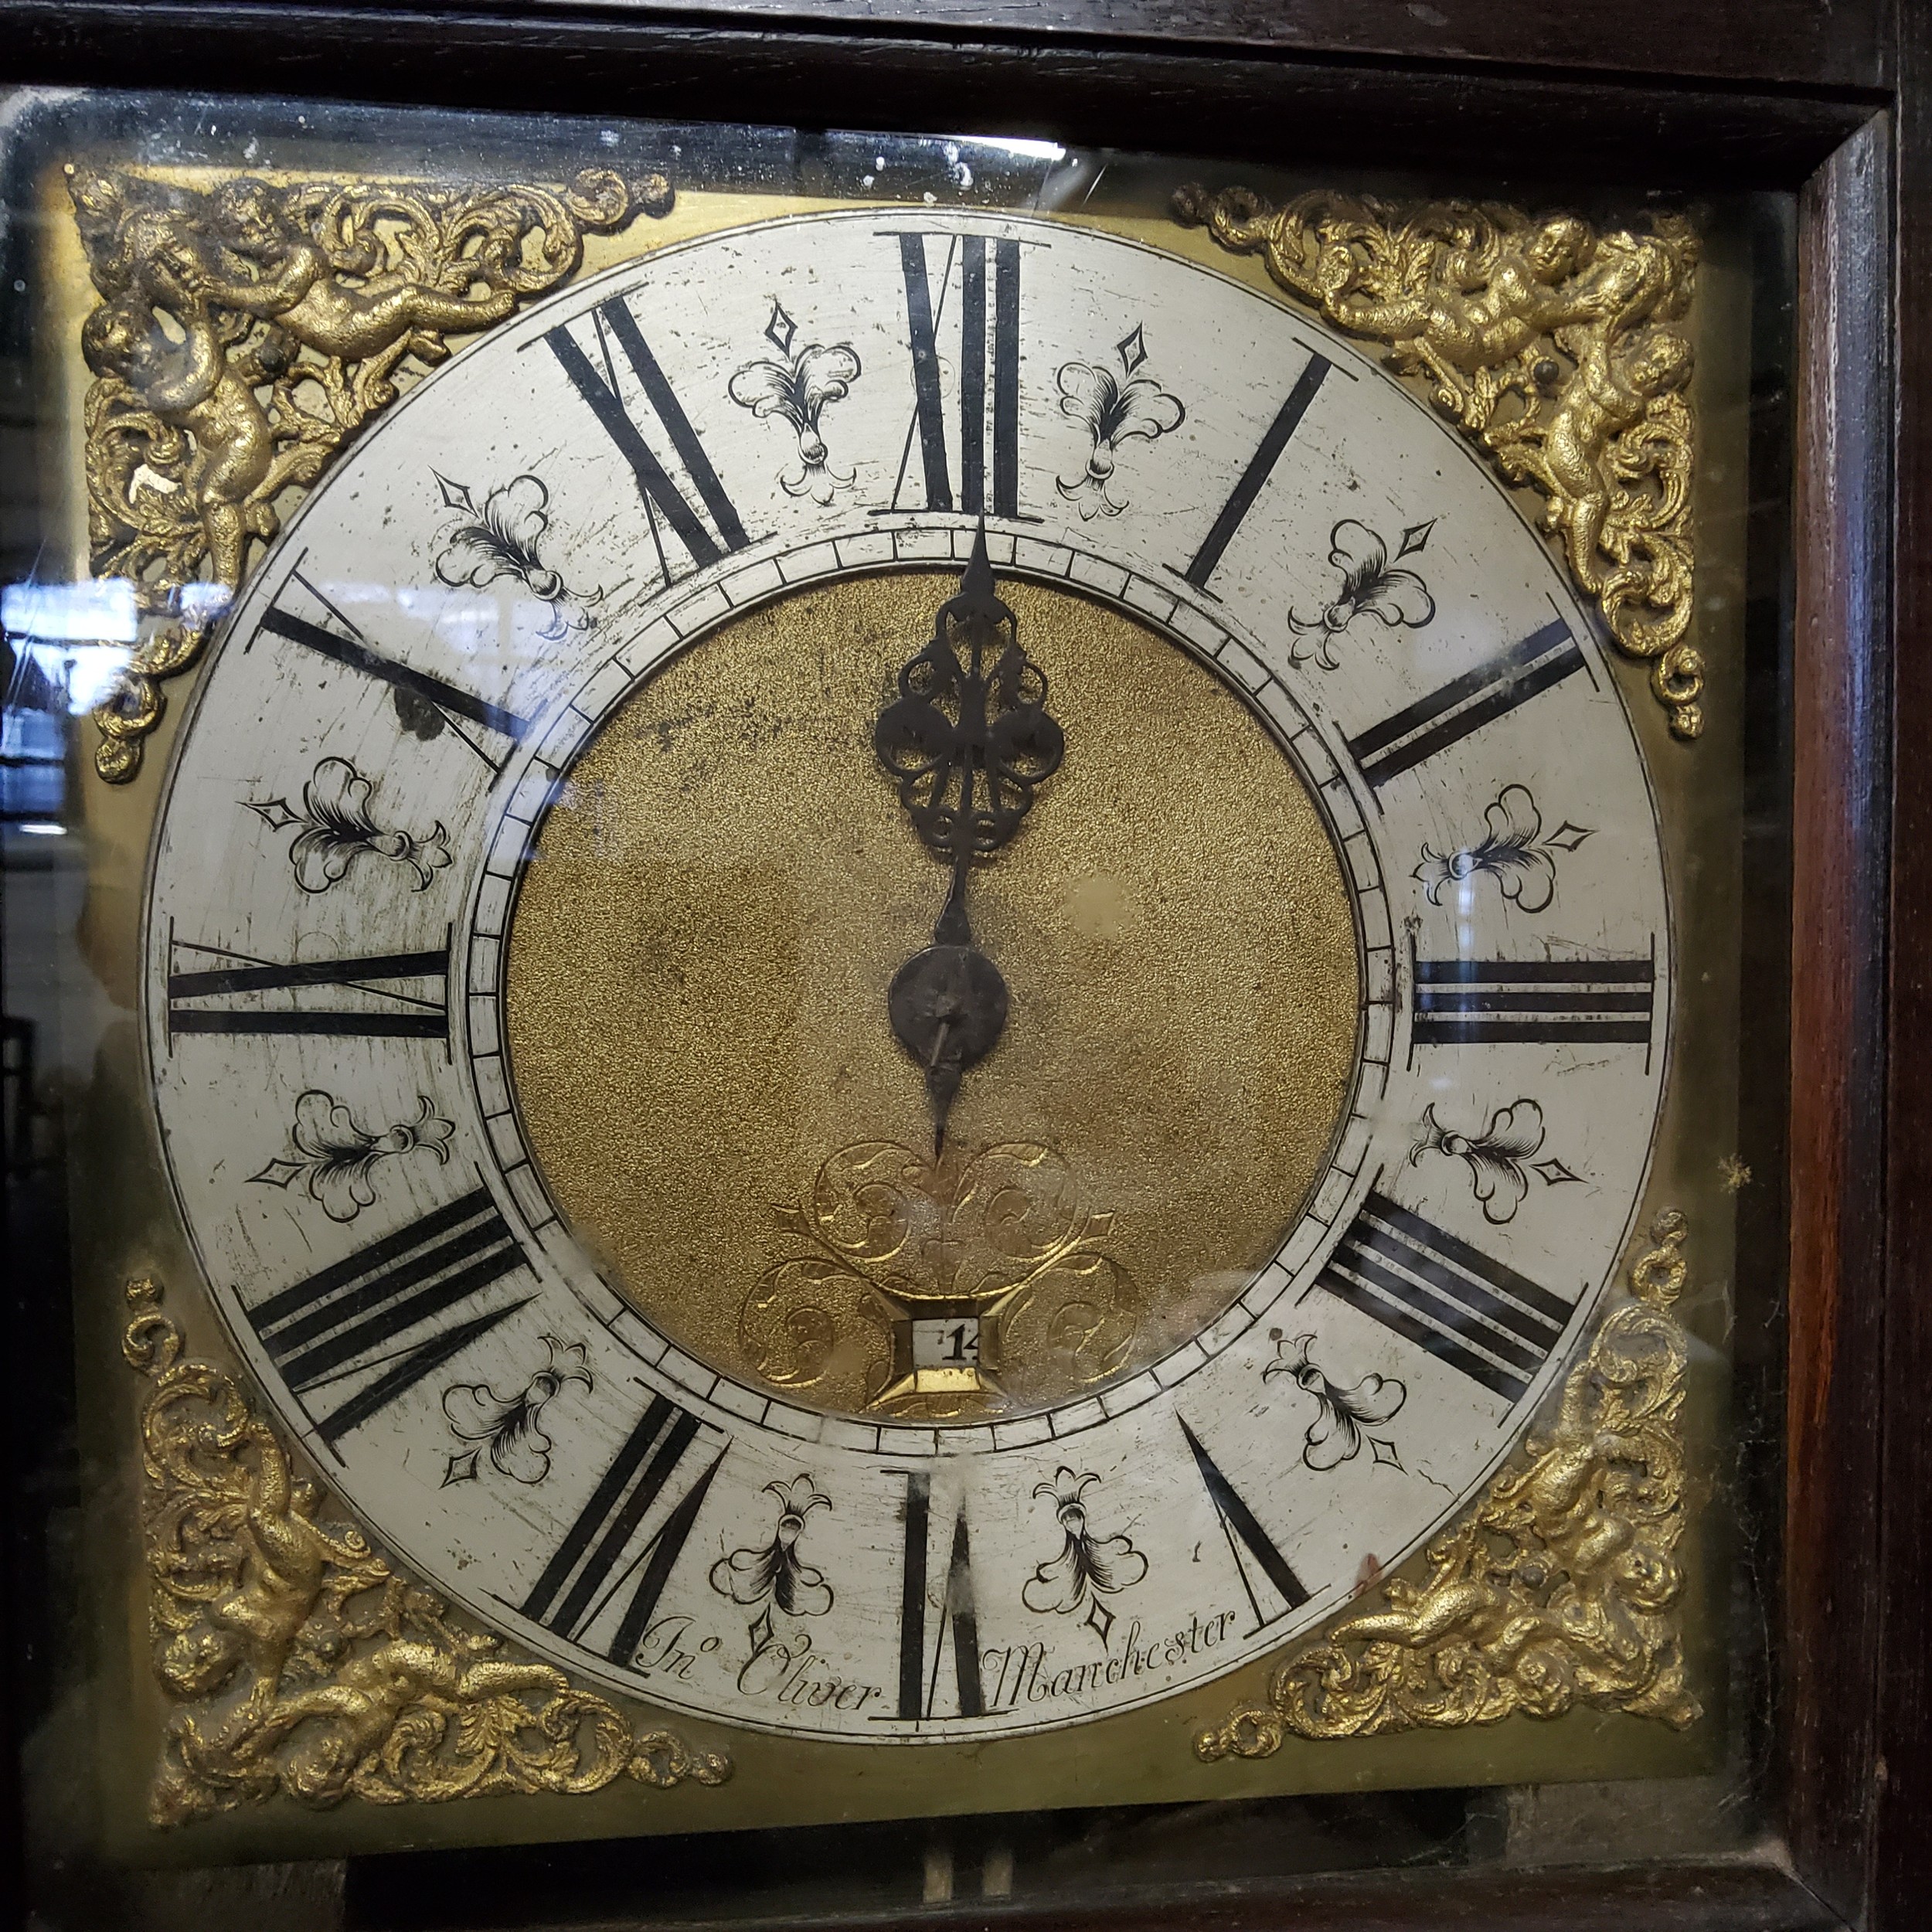 A George III English oak longcase clock, the oversailing ogee hood with decorative fretwork details, - Image 3 of 3